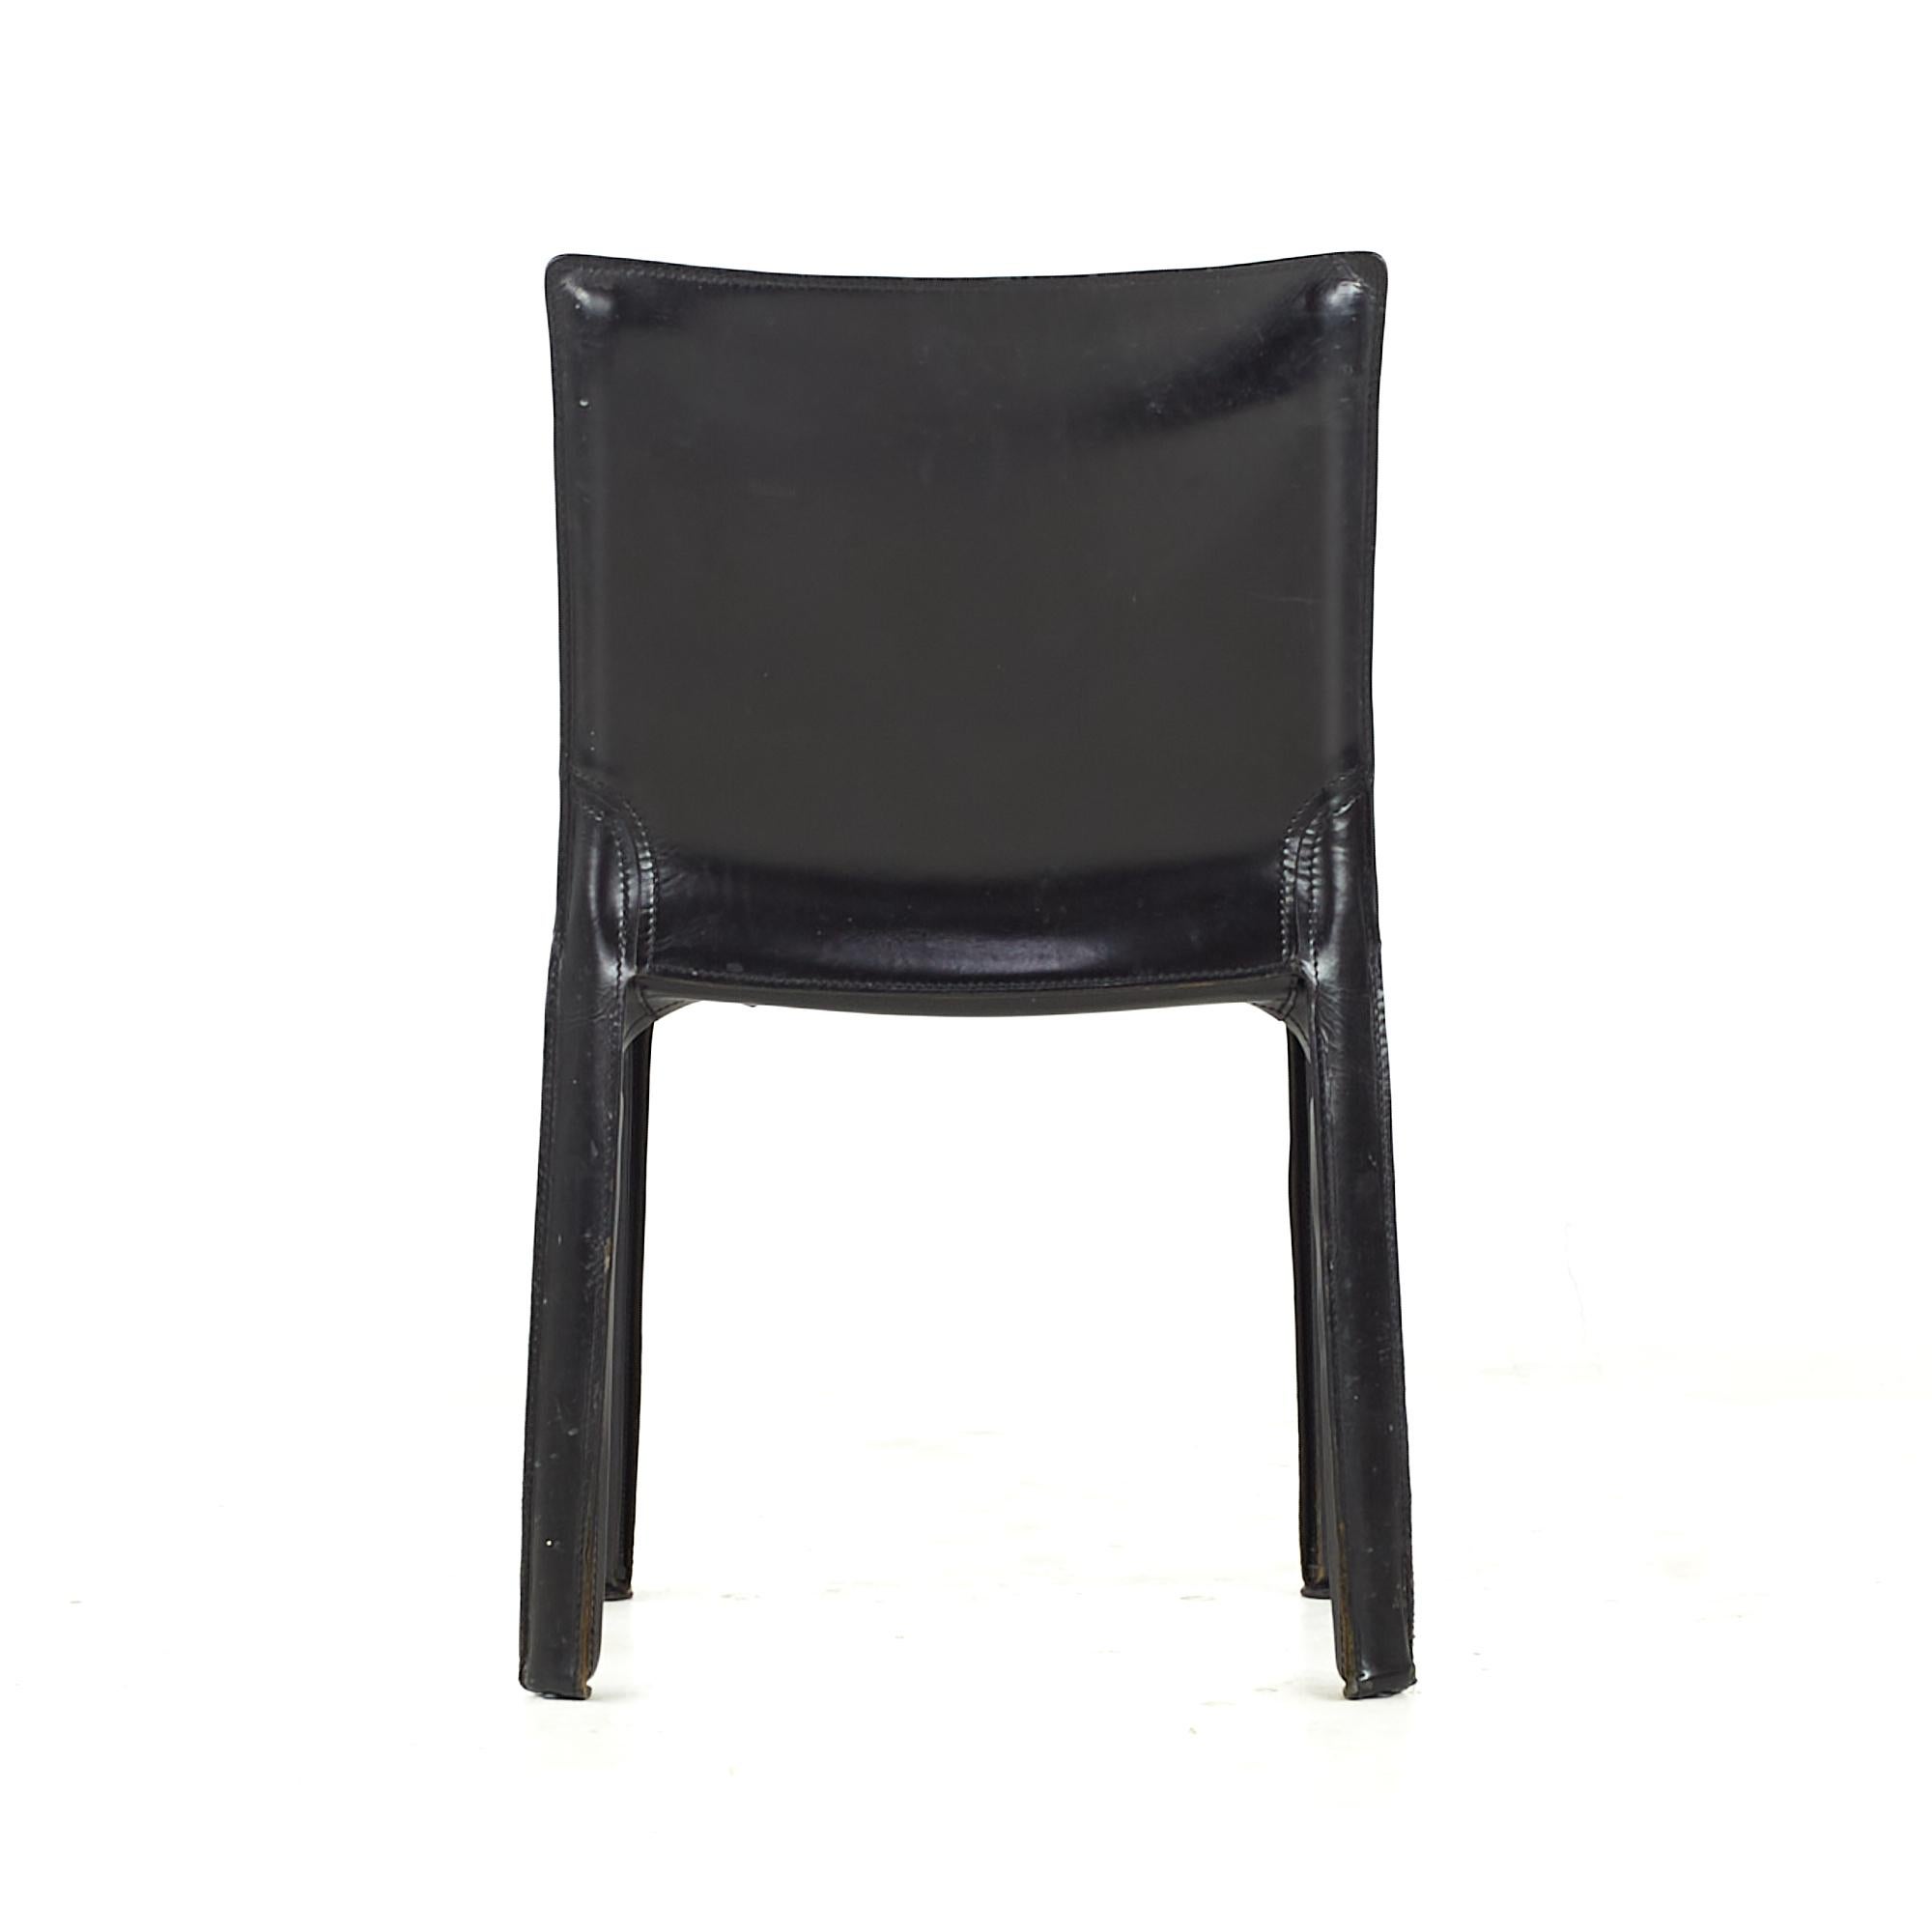 Mario Bellini for Cassina Midcentury Cab Side Chairs, Set of 4 For Sale 1